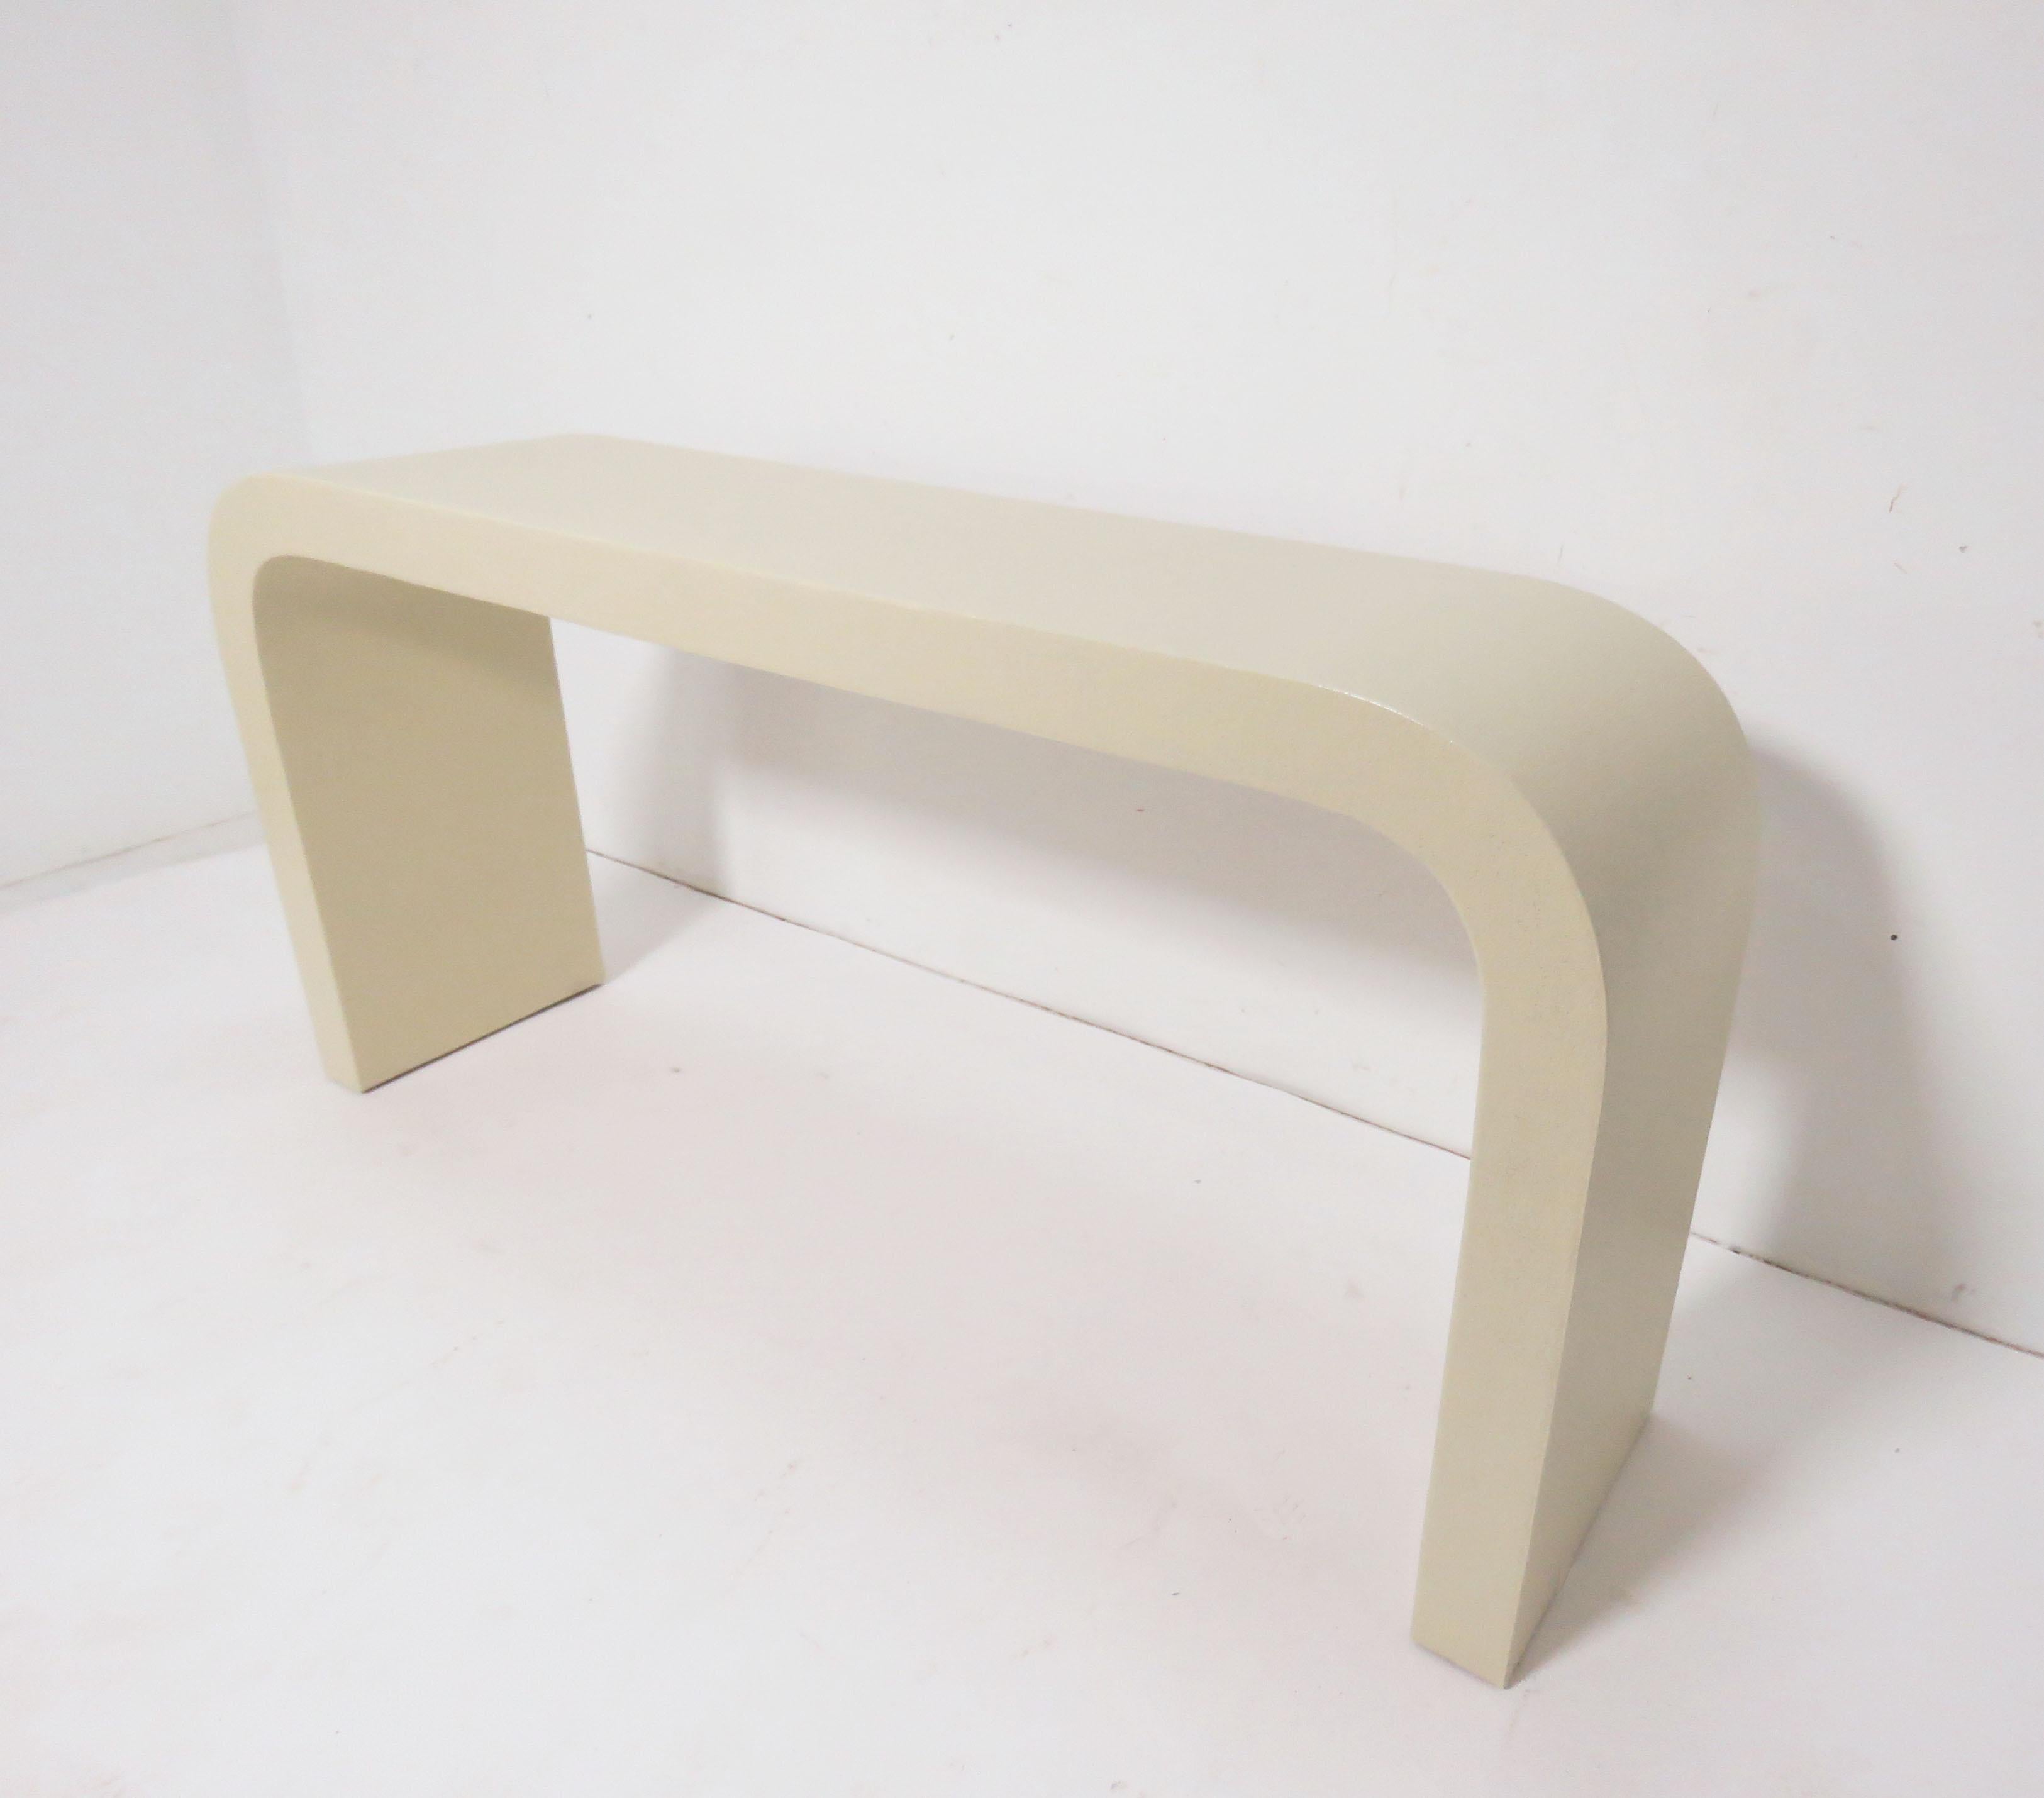 An original 1970s era, linen wrapped waterfall console table in the manner of Karl Springer or Jay Spectre.